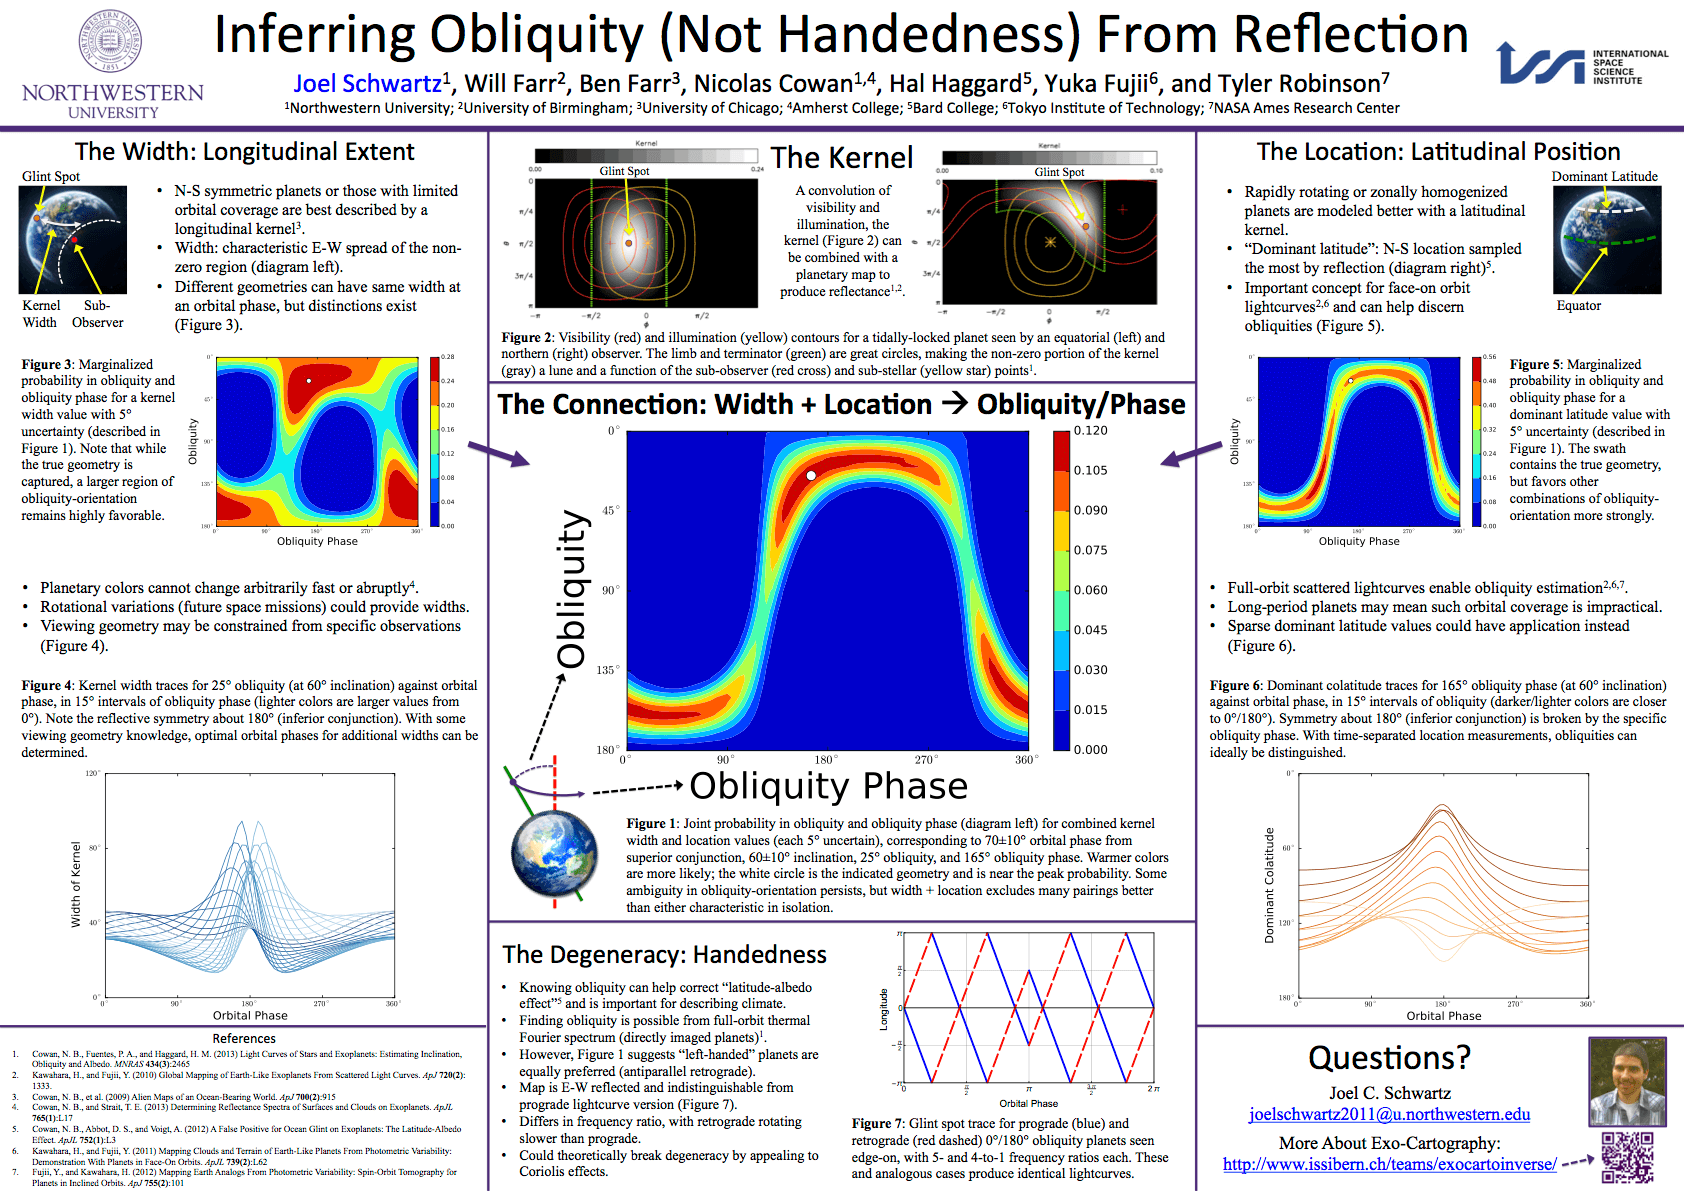 Poster about inferring planetary obliquity